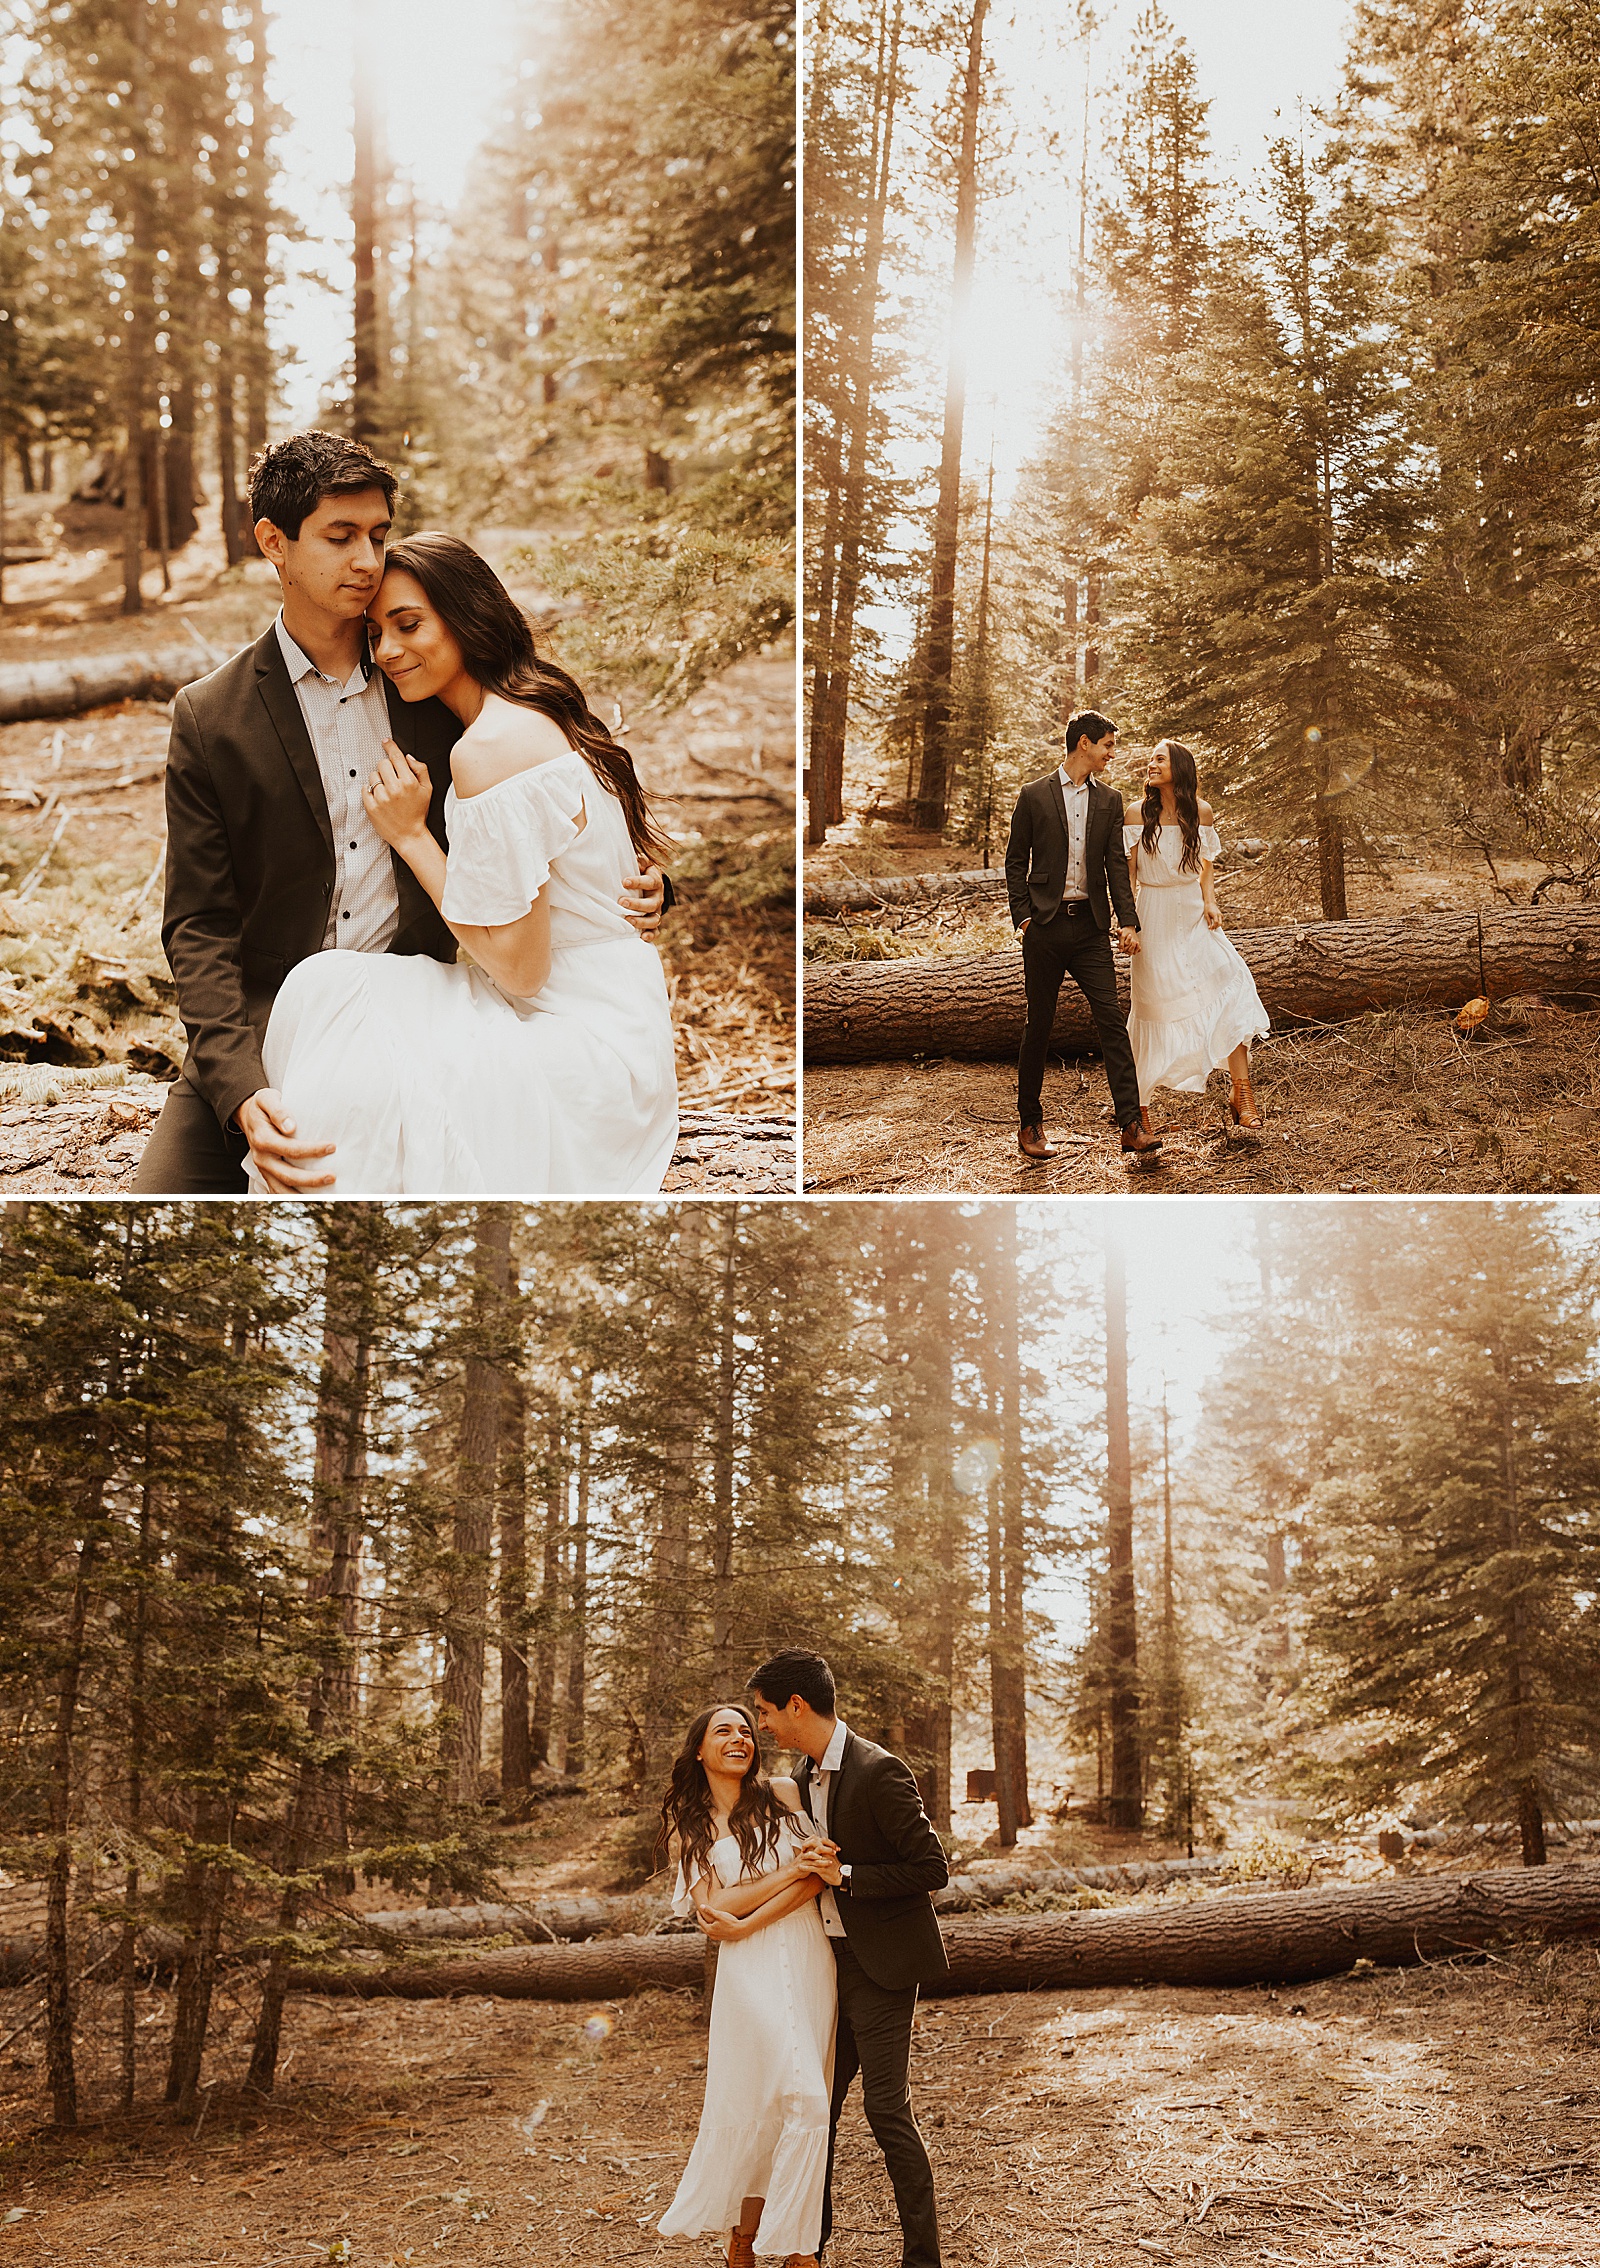 Gorgeous engagement photos at Kings Canyon and Sequoia National Park at golden hour.